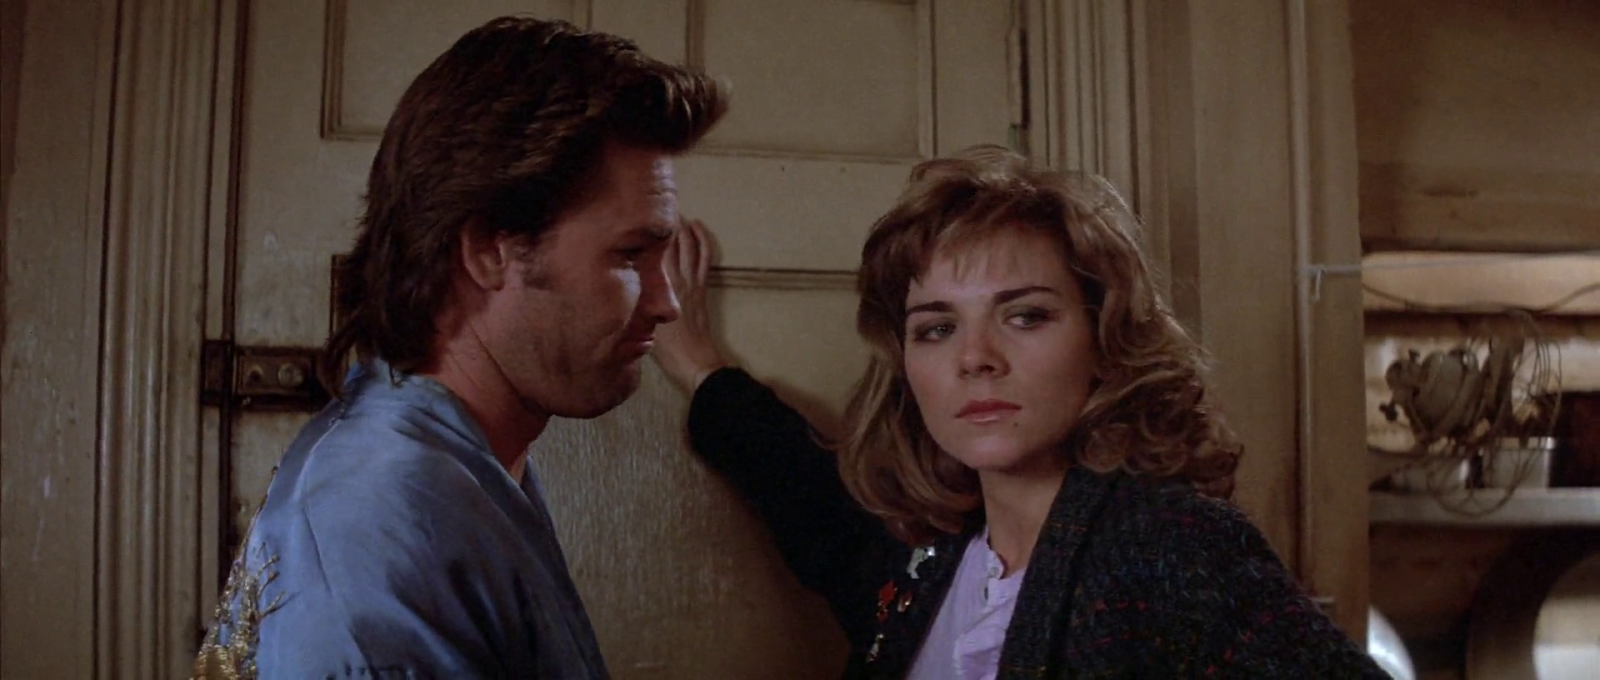 Big-Trouble-in-Little-China-Kurt-Russell-Kim-Cattrall.png